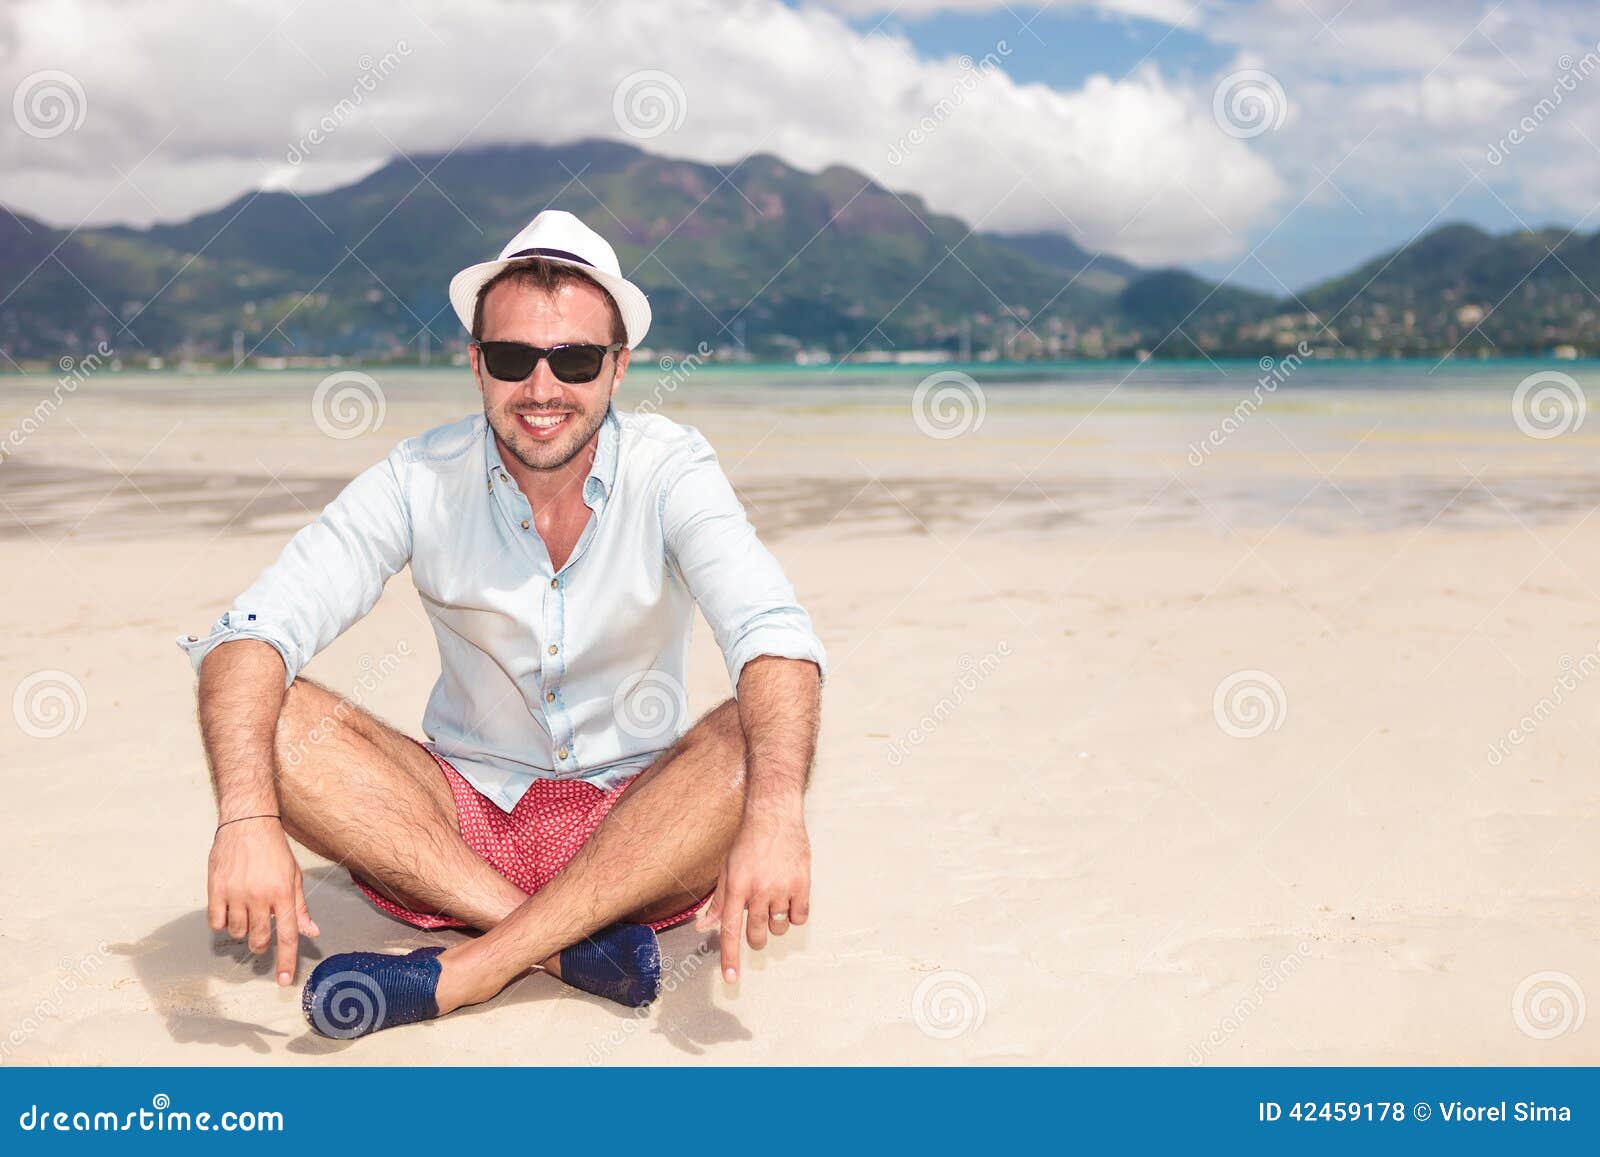 Smiling Young Man Sitting on the Beach Stock Photo - Image of fresh ...